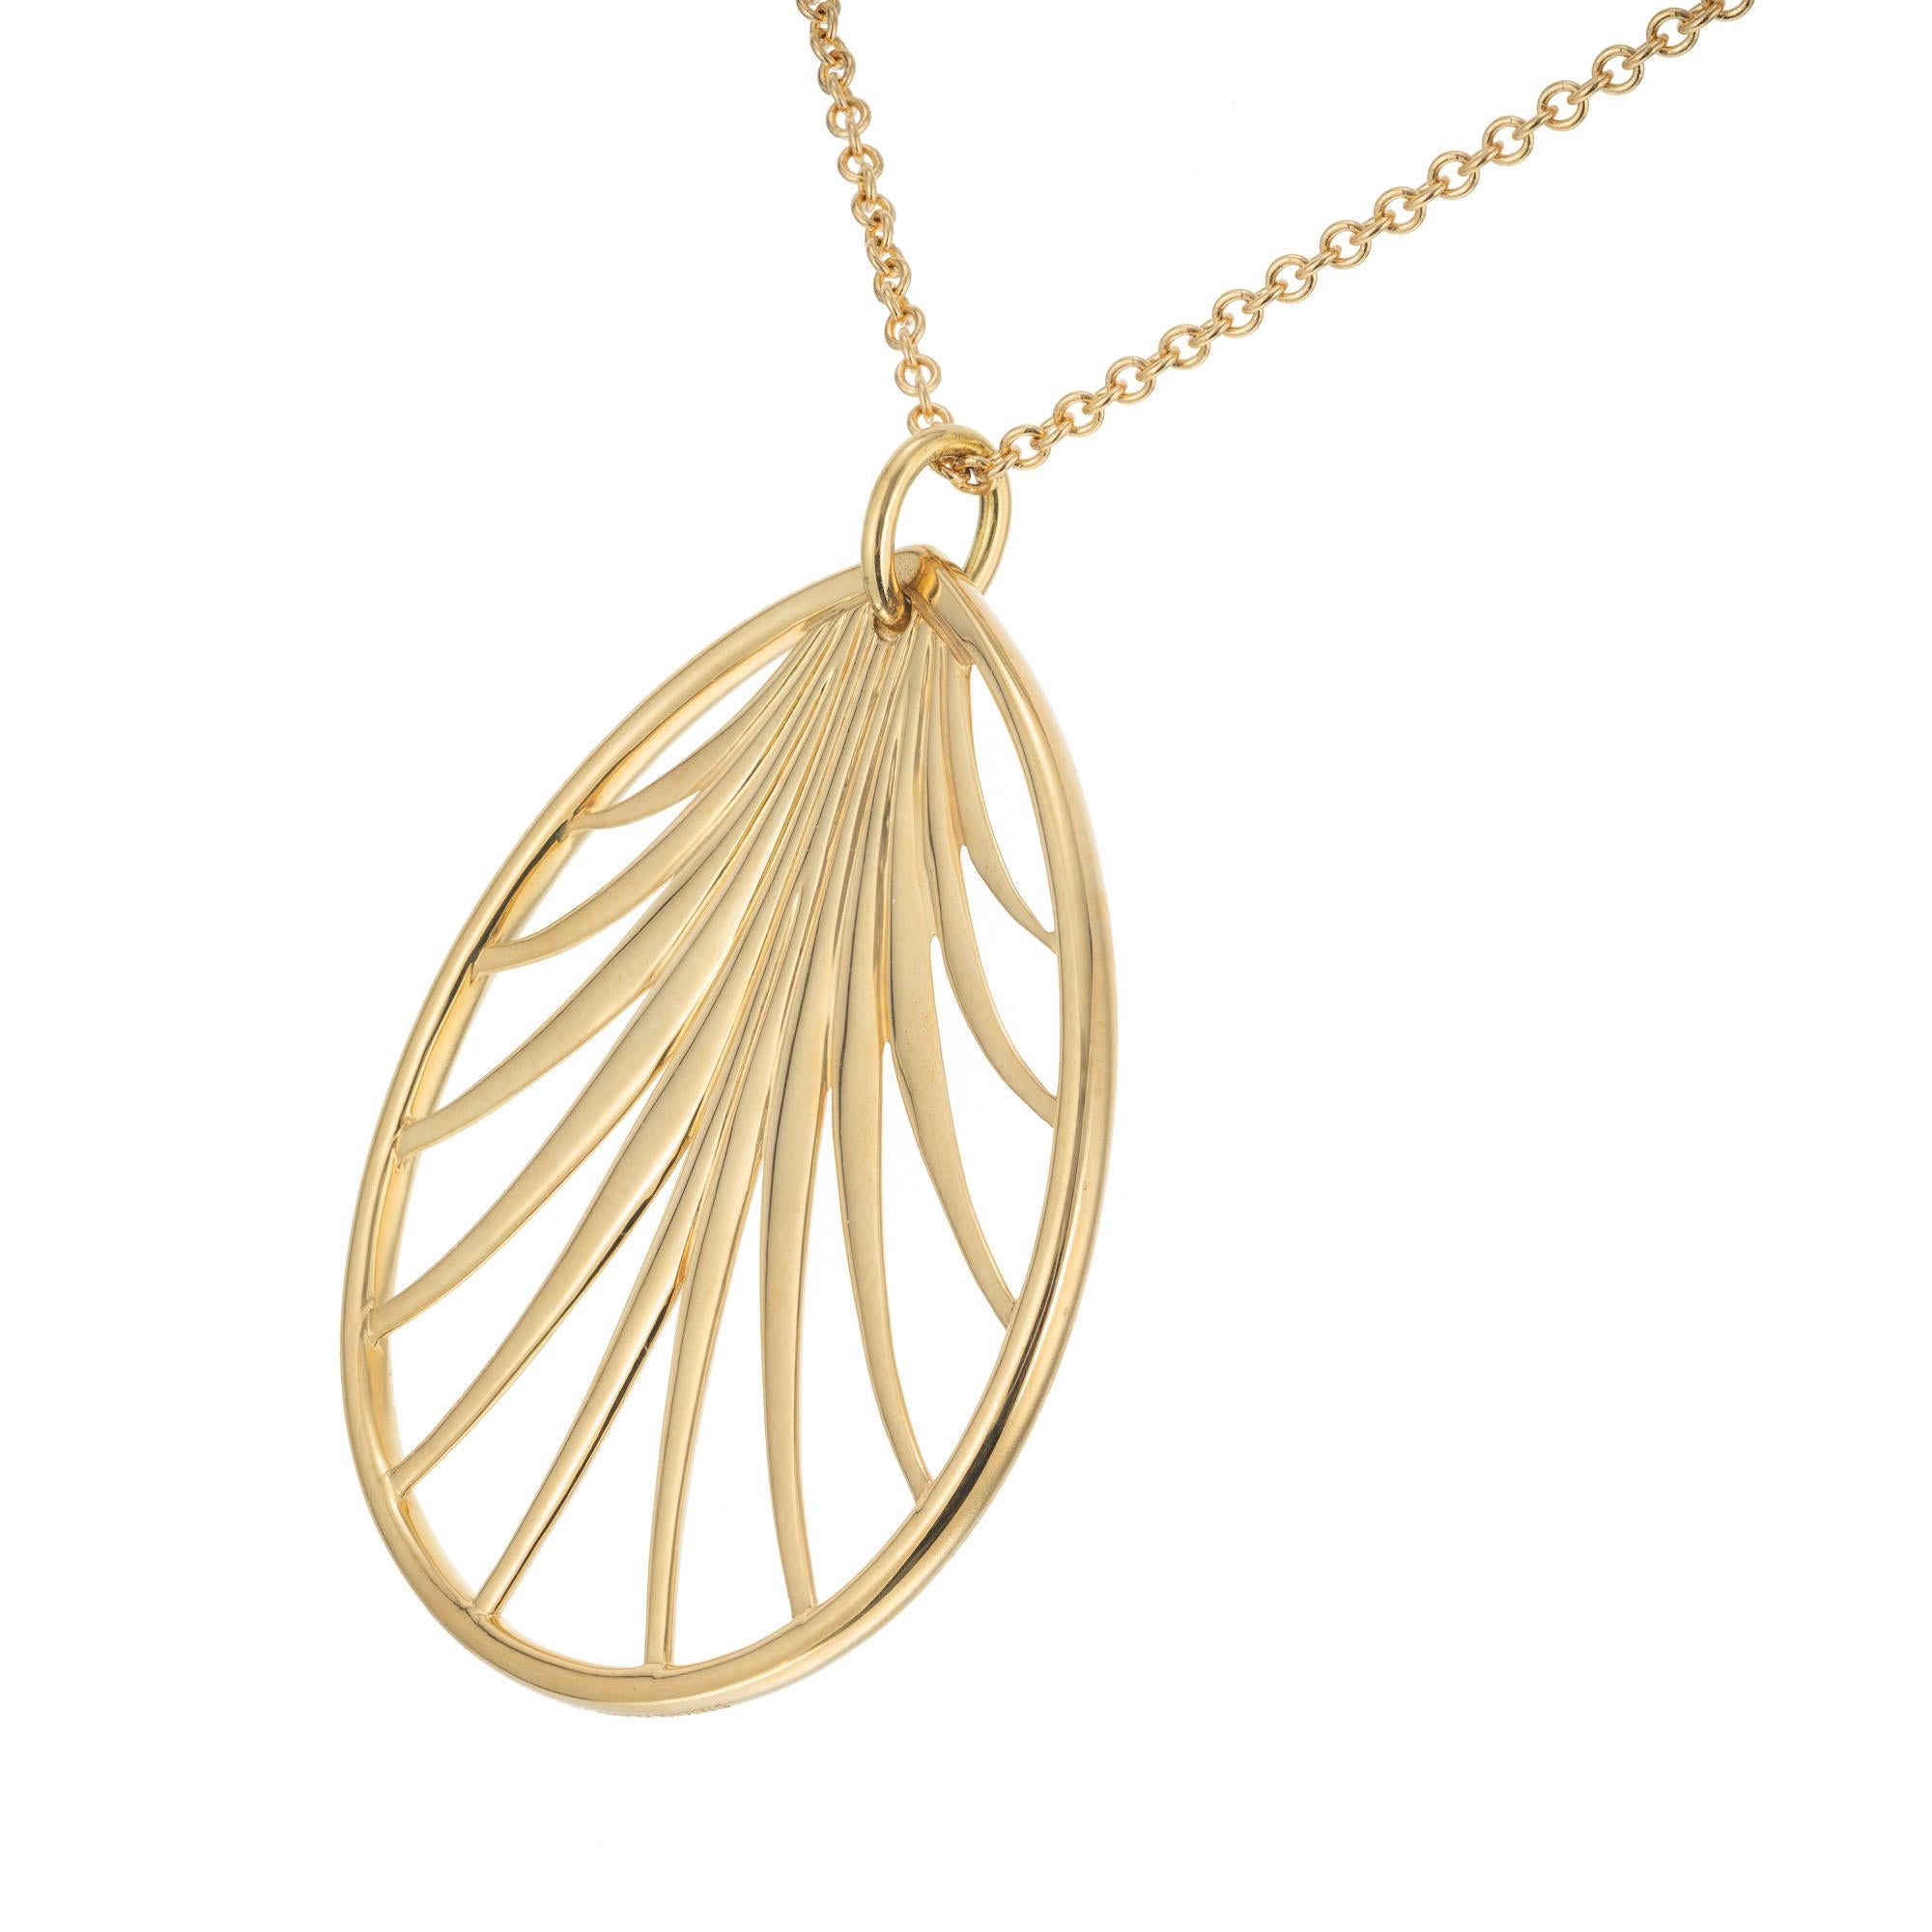 Paloma Picasso palm tree leaf pendant necklace. 18k yellow gold with a 30 Inch chain. Signed T + Co Paloma Picasso. Includes Tiffany box and pouch.

18k yellow gold 
Stamped: 750
Hallmark: T + Co Paloma Picasso 
14.8 grams
Top to bottom: 39.2mm or